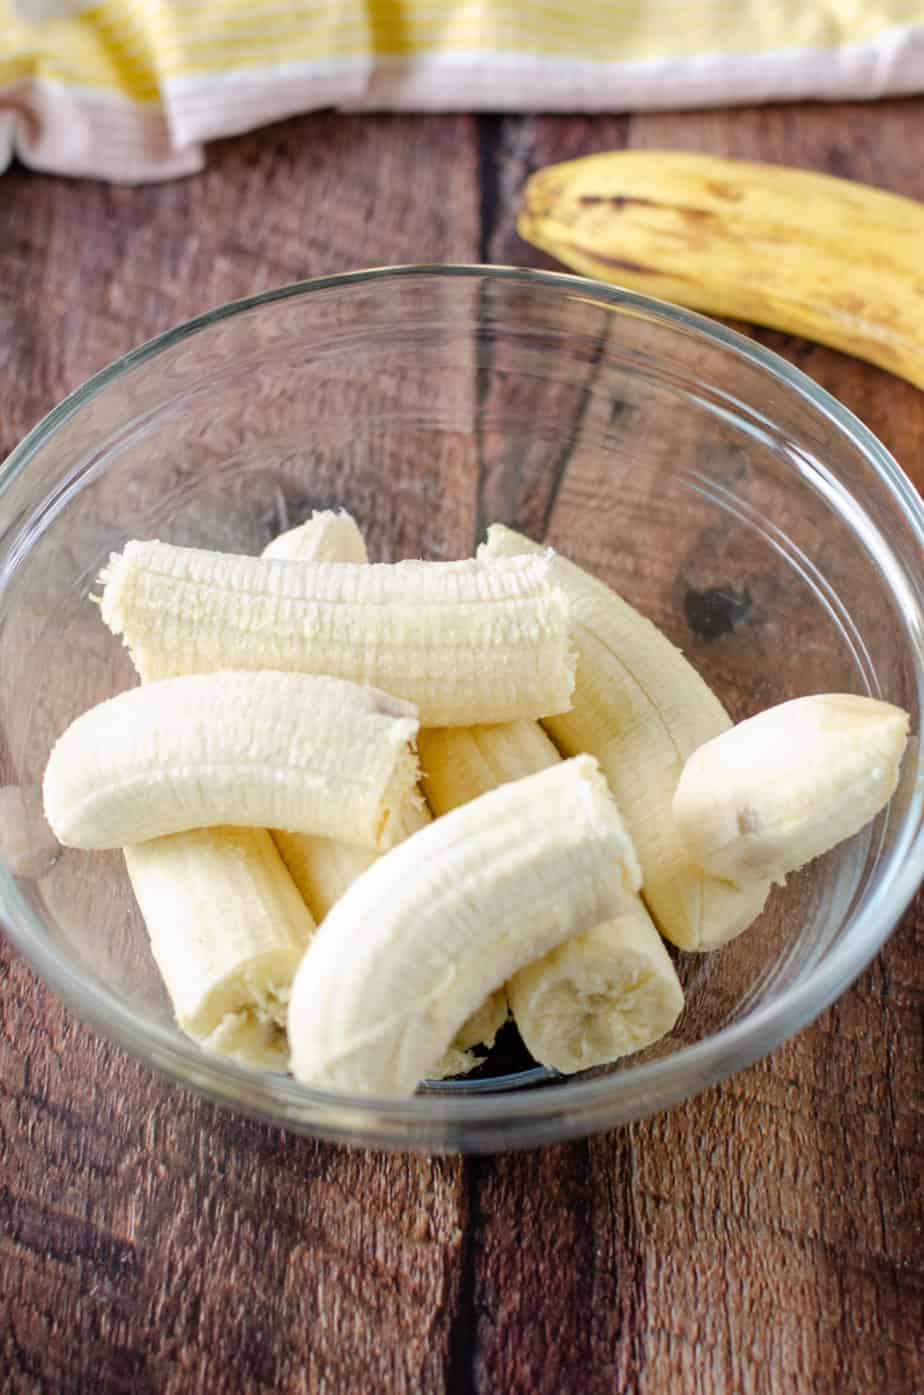 peeled bananas in a glass bowl